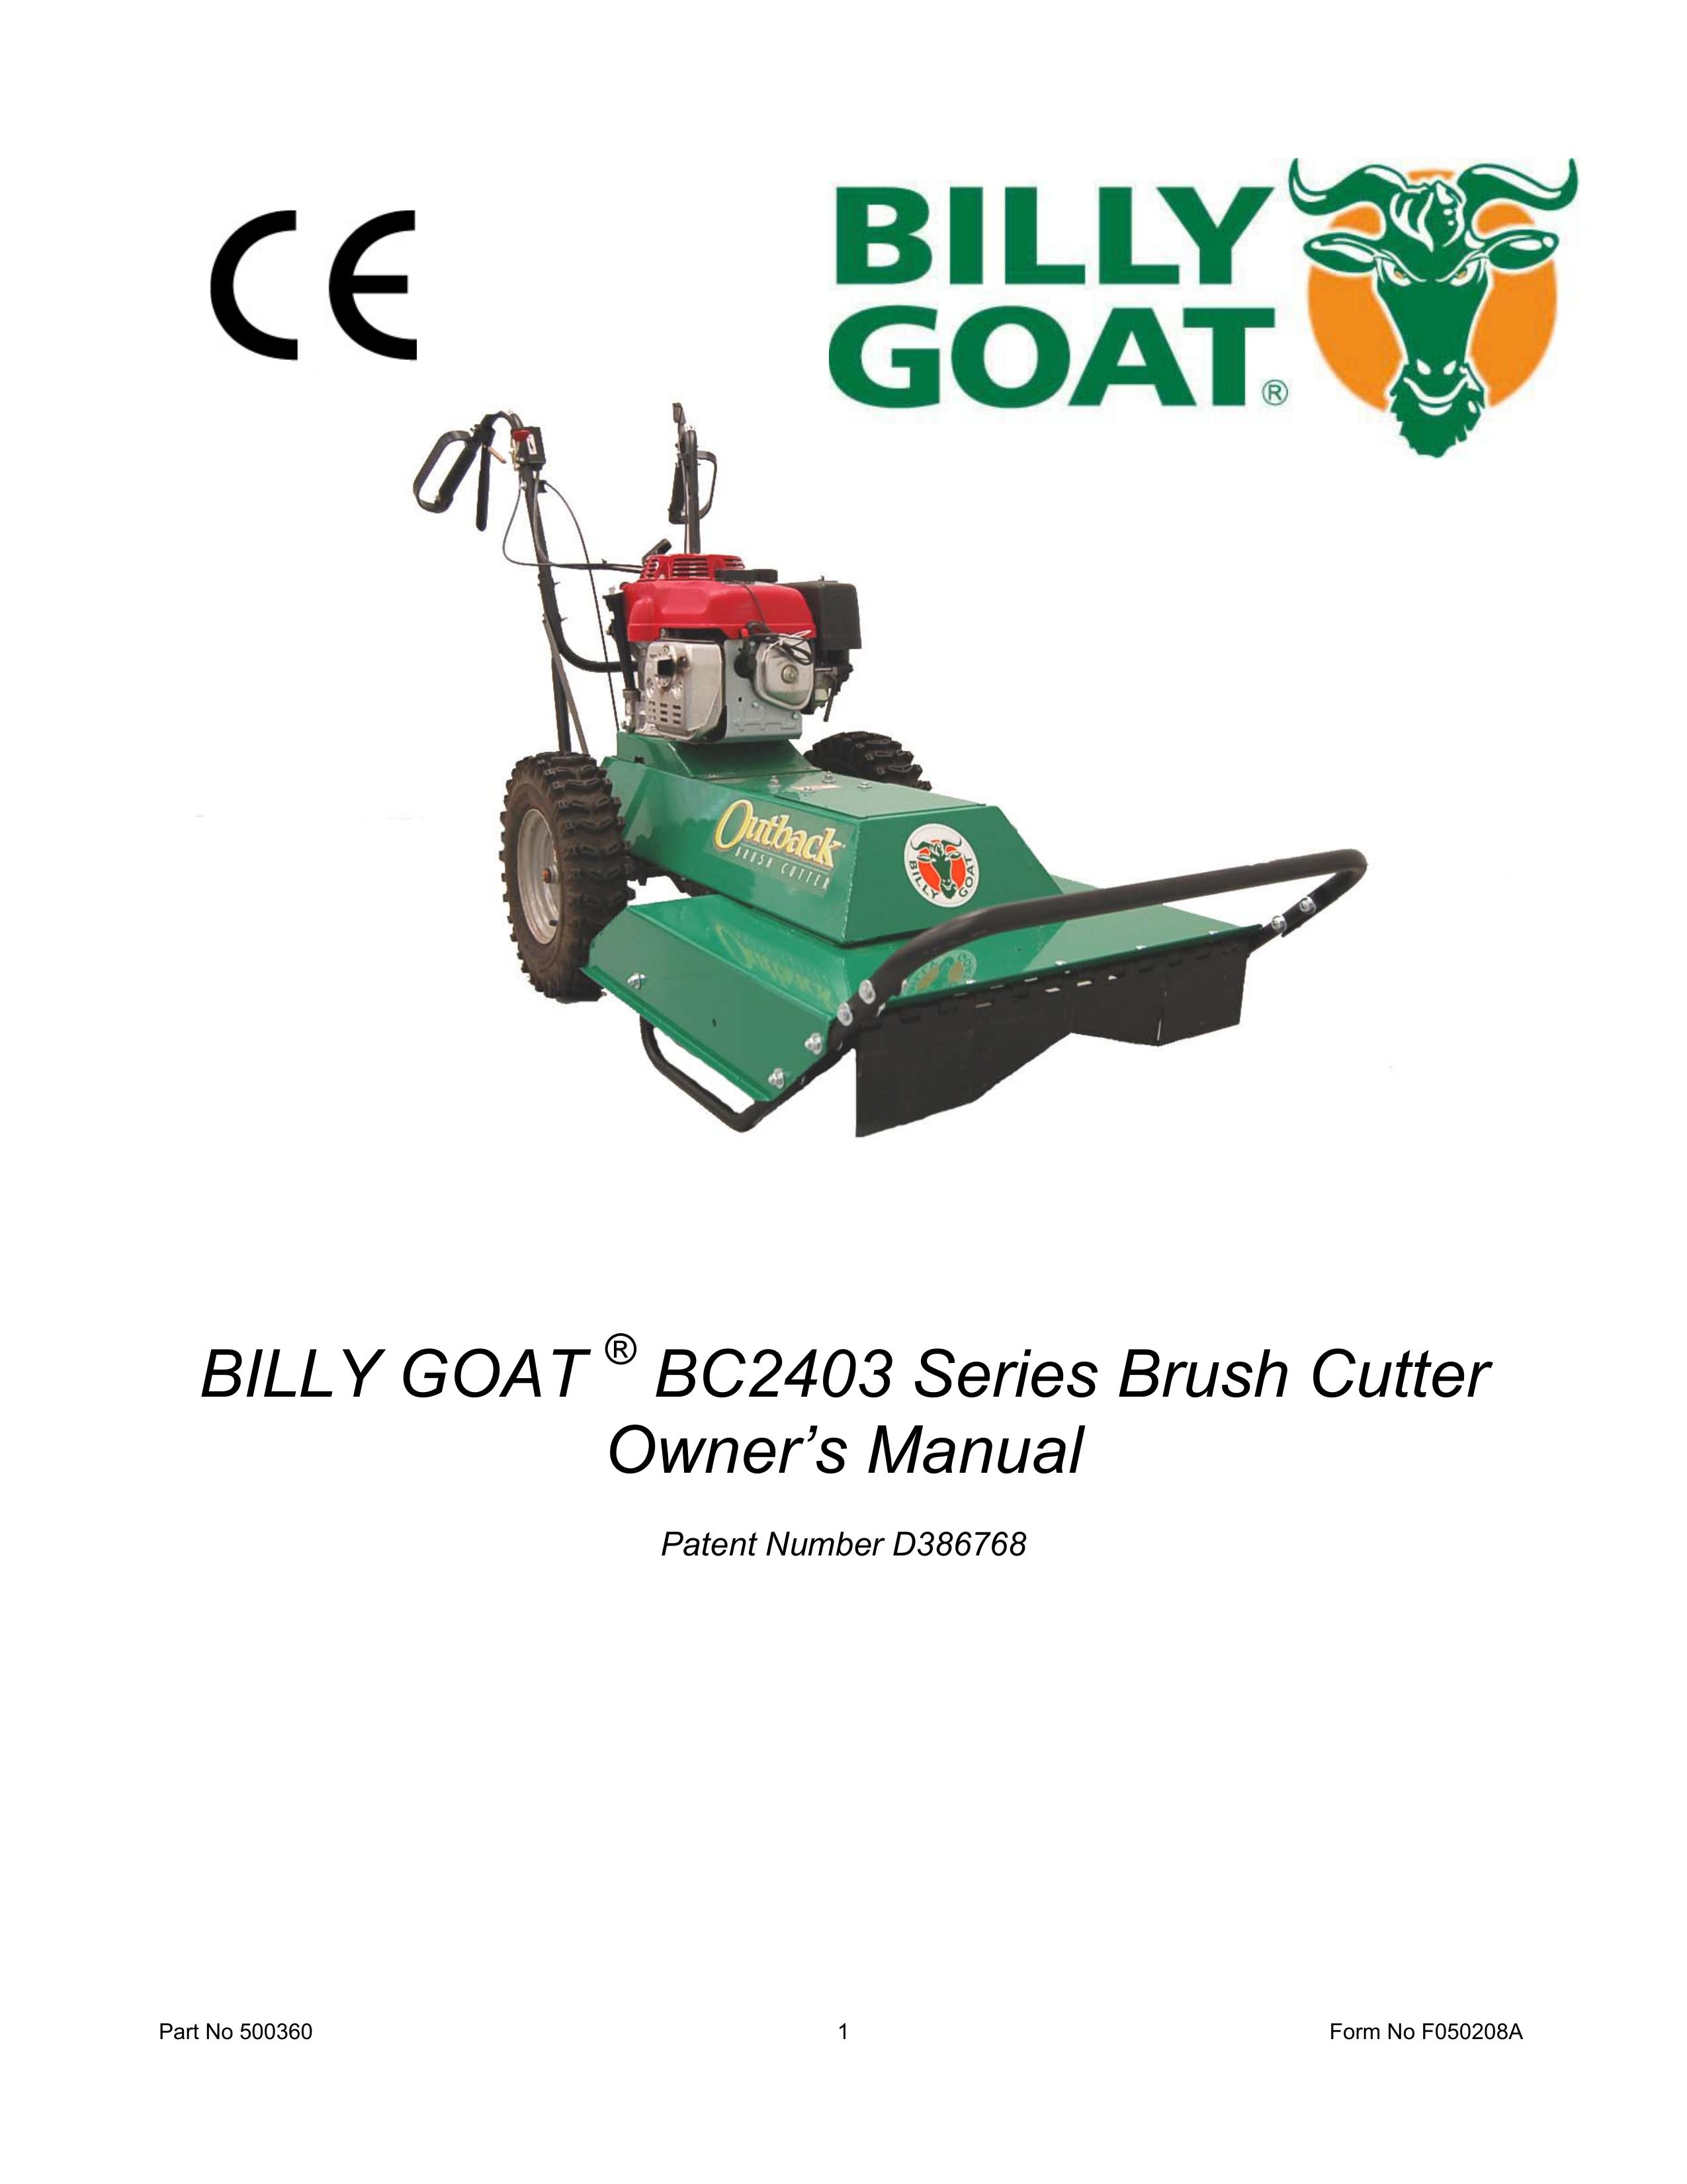 Billy Goat BC2403 Series Brush Cutter User Manual